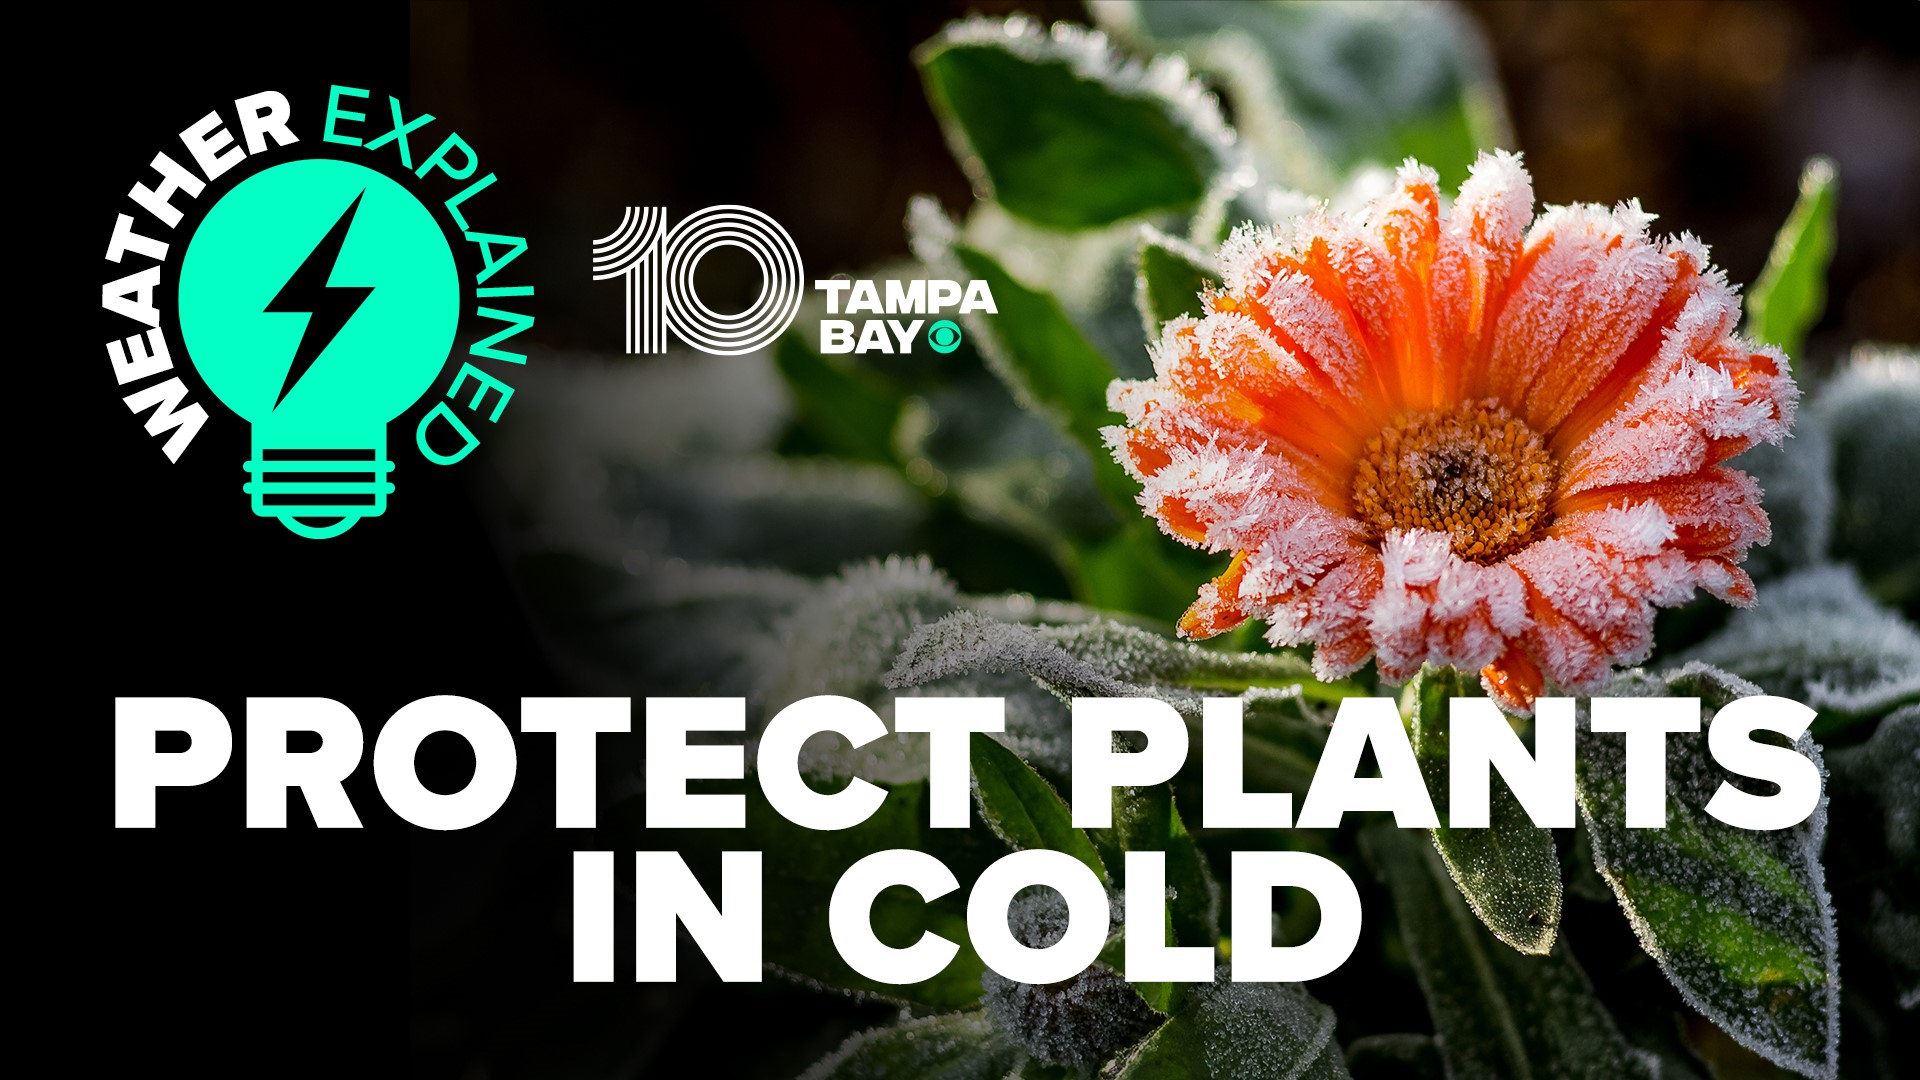 10 Tampa Bay meteorologist Natalie Ferrari explains what to do with your plants should a frost or freeze threaten.